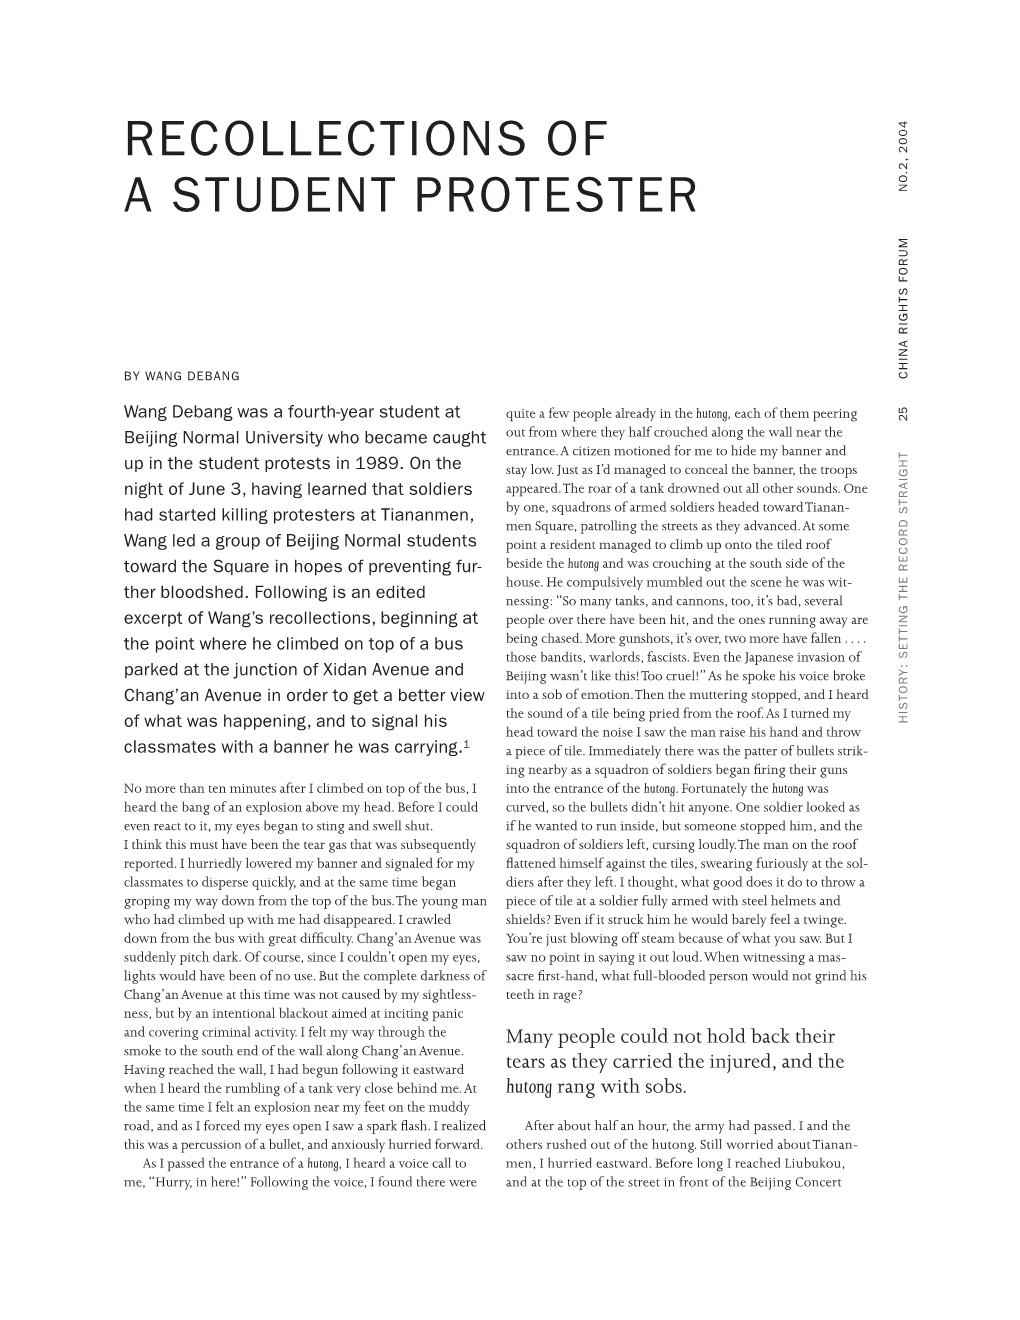 Recollections of a Student Protester